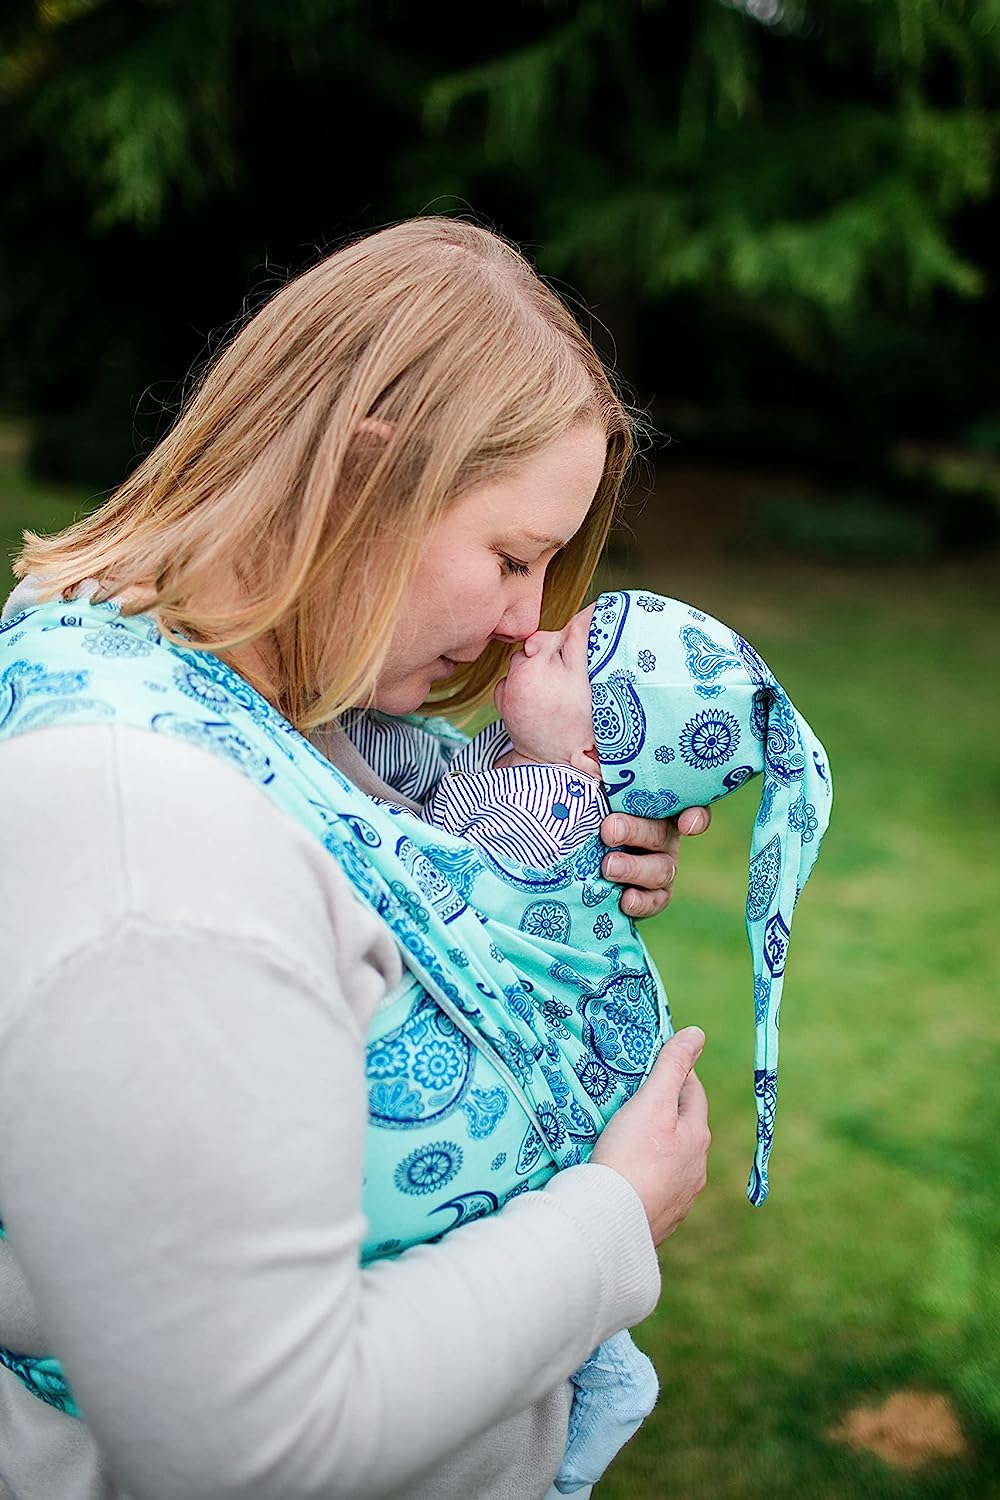 Joy and Joe Organic Stretchy Baby Carrier Sling Premium Carrier Bag Tested in the UK by Joy and Joe® Suitable from Birth to 16kg with Hat, Bag and Colour Instructions (Skull)